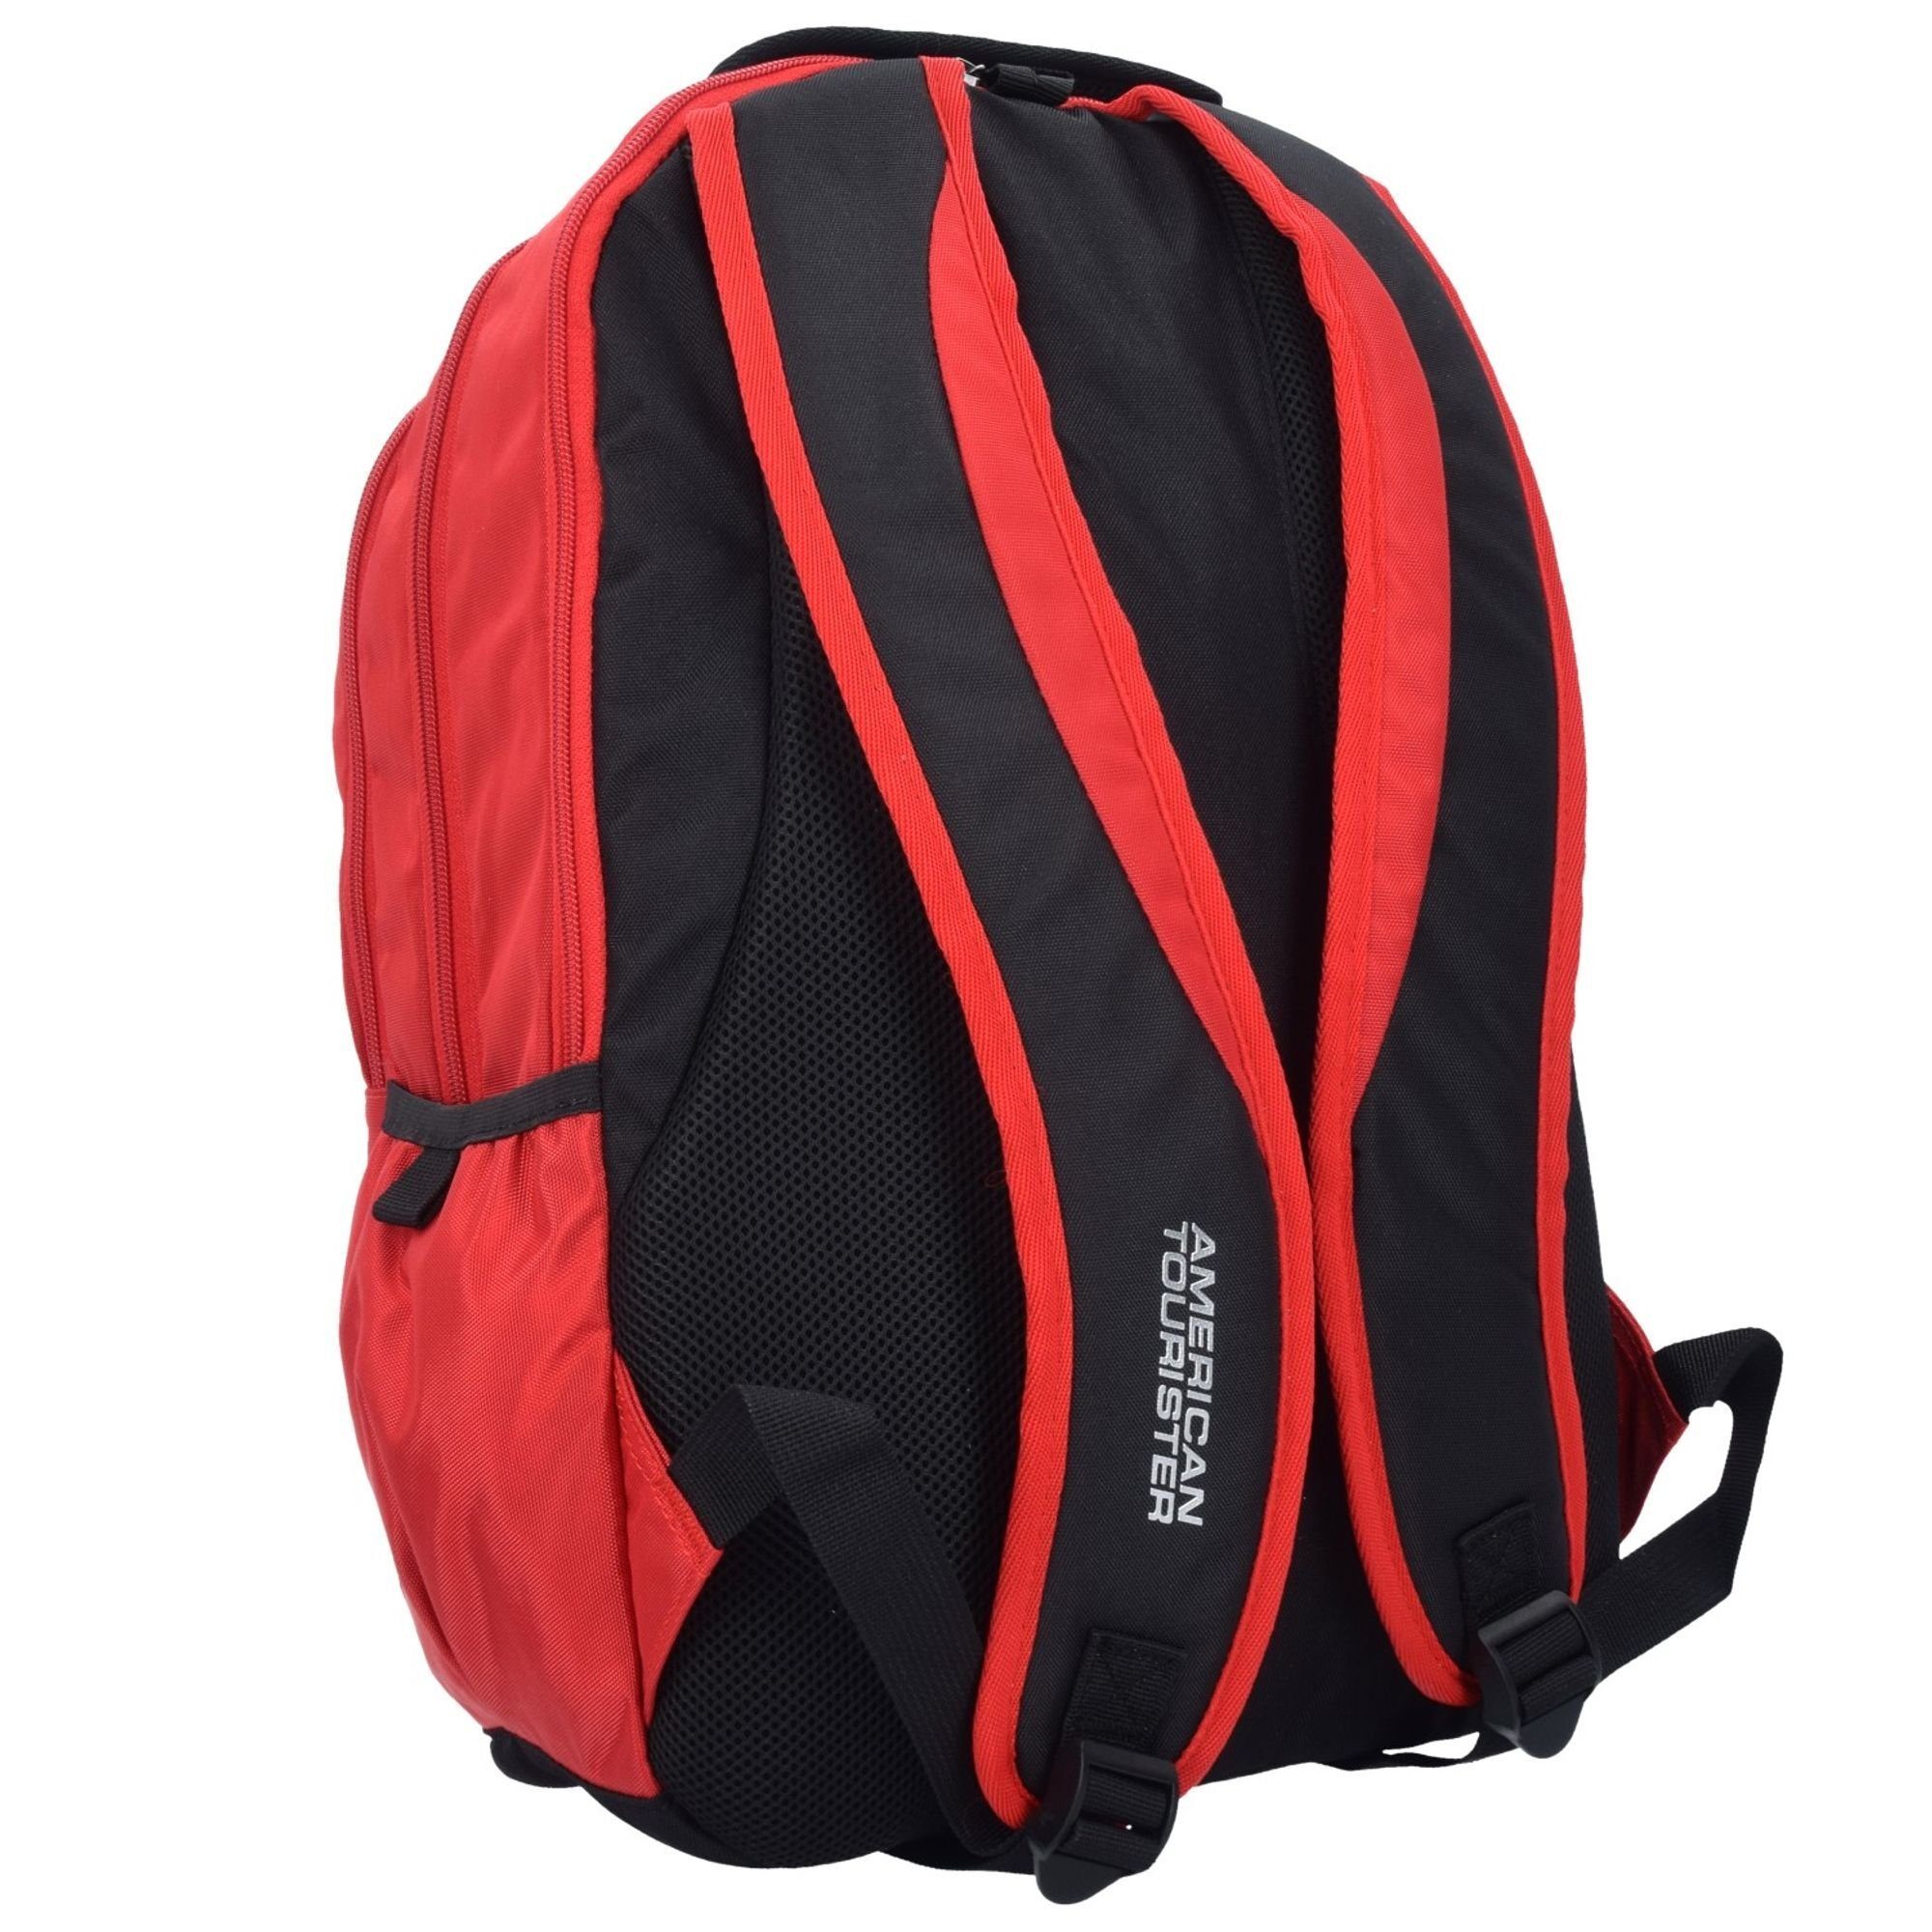 red American Laptoprucksack Polyester Groove, Urban Tourister®